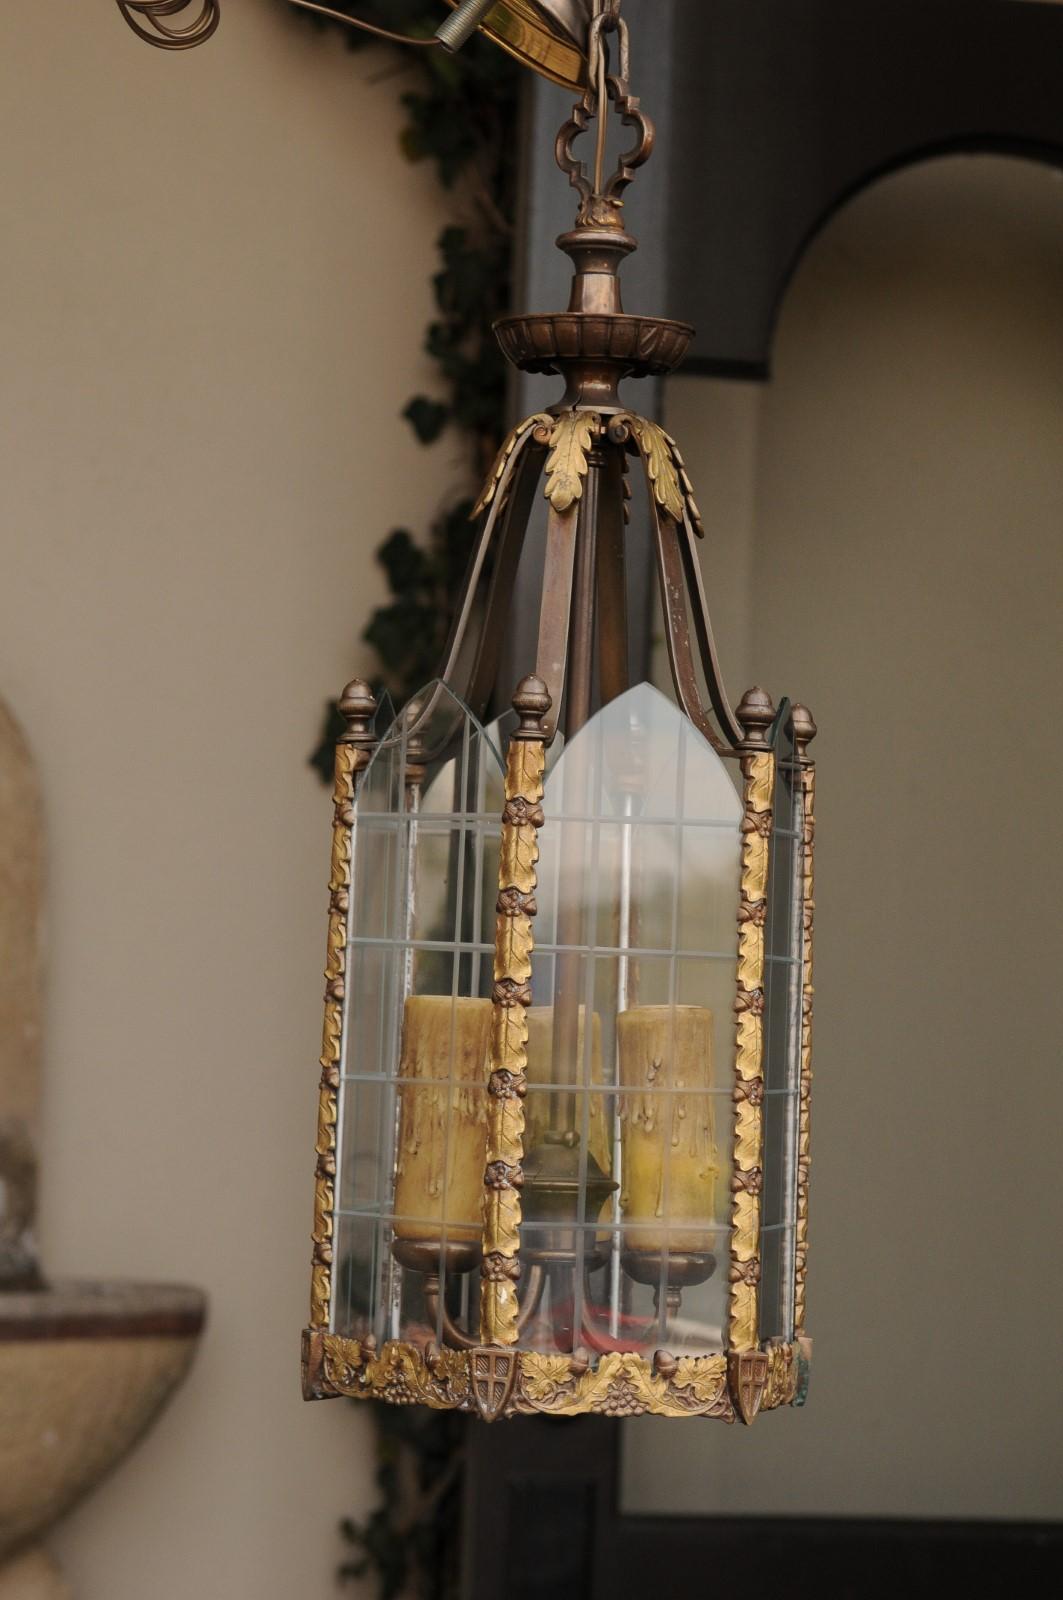 A petite English Edwardian period bronze Gothic Revival hexagonal lantern from the early 20th century, with glass panels, grape and shield motifs. Born in England in the early years of King Edward VII reign, this lovely bronze lantern features an